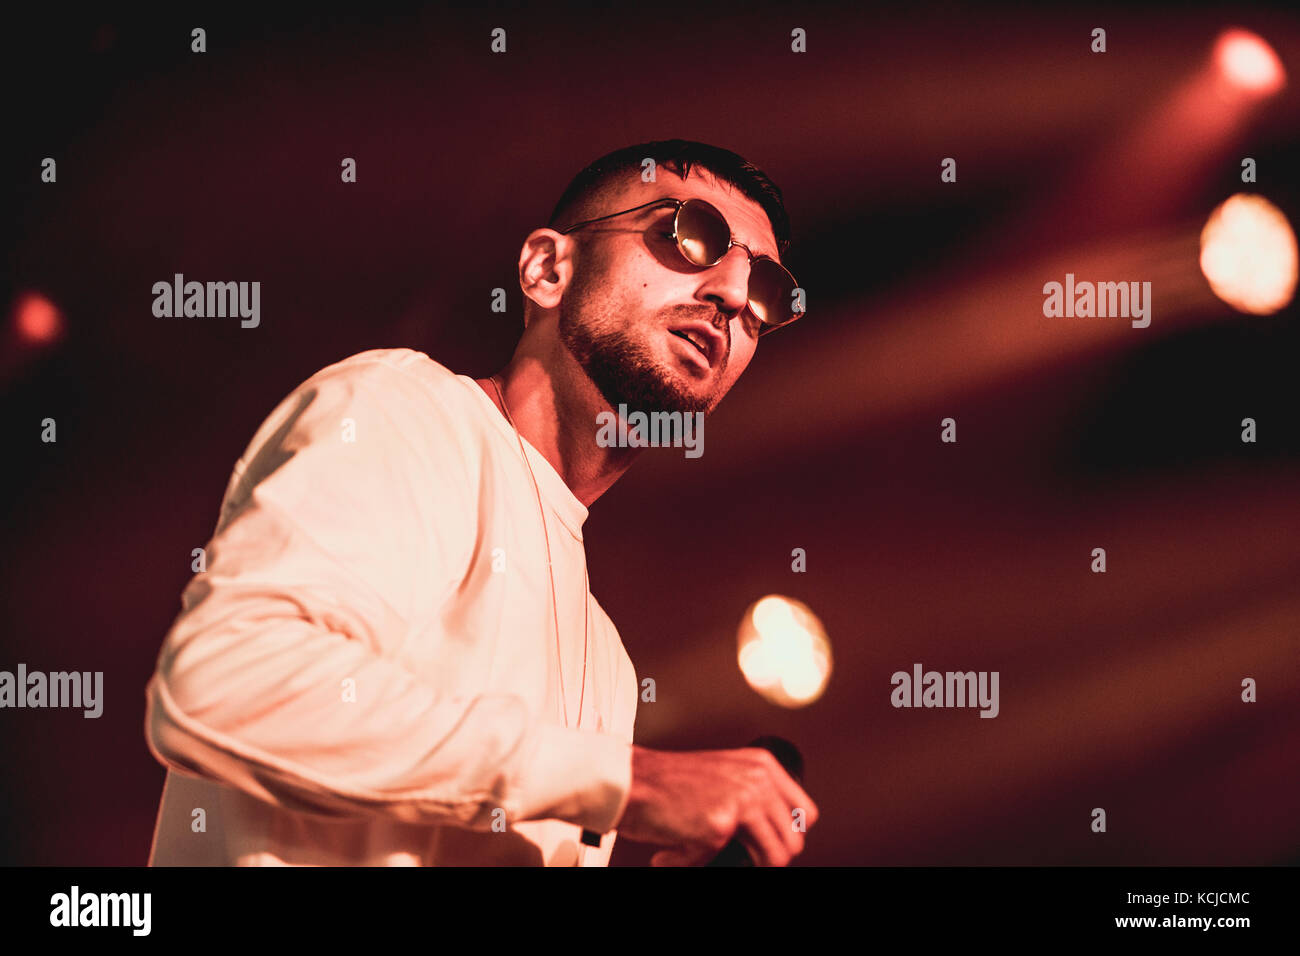 The Danish rapper Sivas (Stylized S!vas) performs a live concert at the Danish music festival Roskilde Festival 2016. Sivas mess up the Danish dictionary combining Danish, English and Arabian in one big ghetto mixture. Denmark, 01/07 2016. Stock Photo